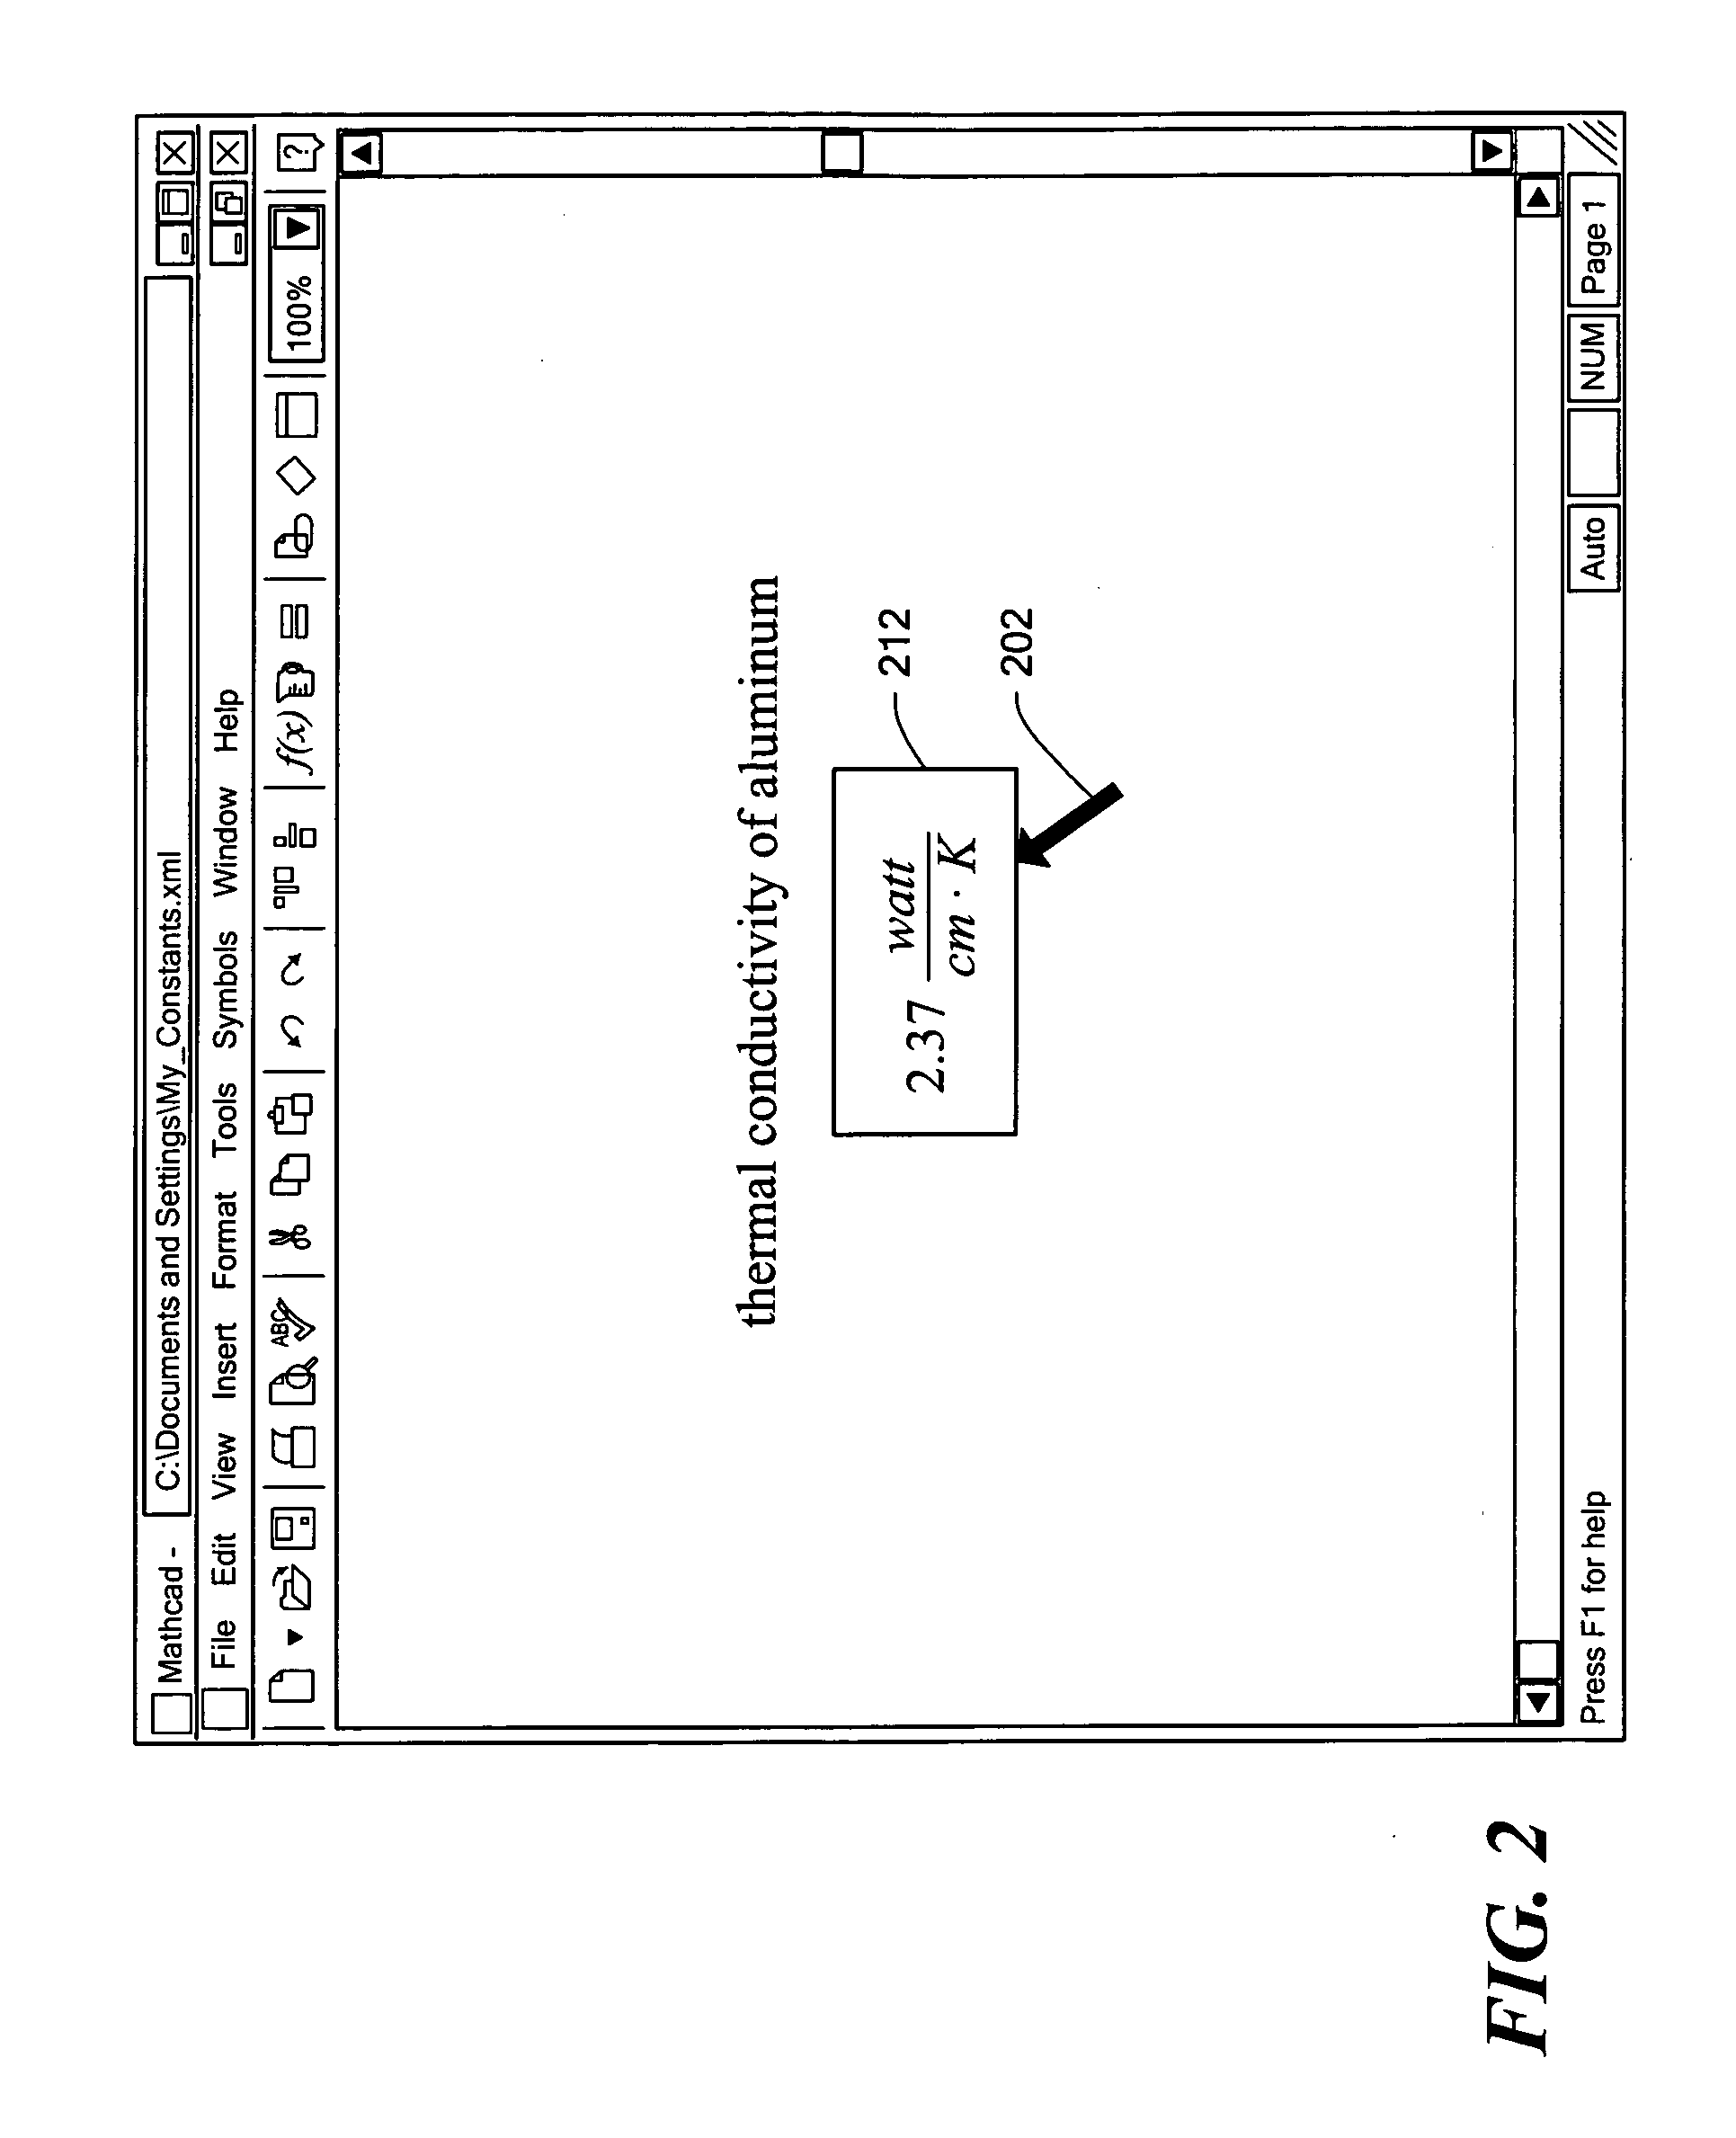 Method for automatically enabling traceability of engineering calculations